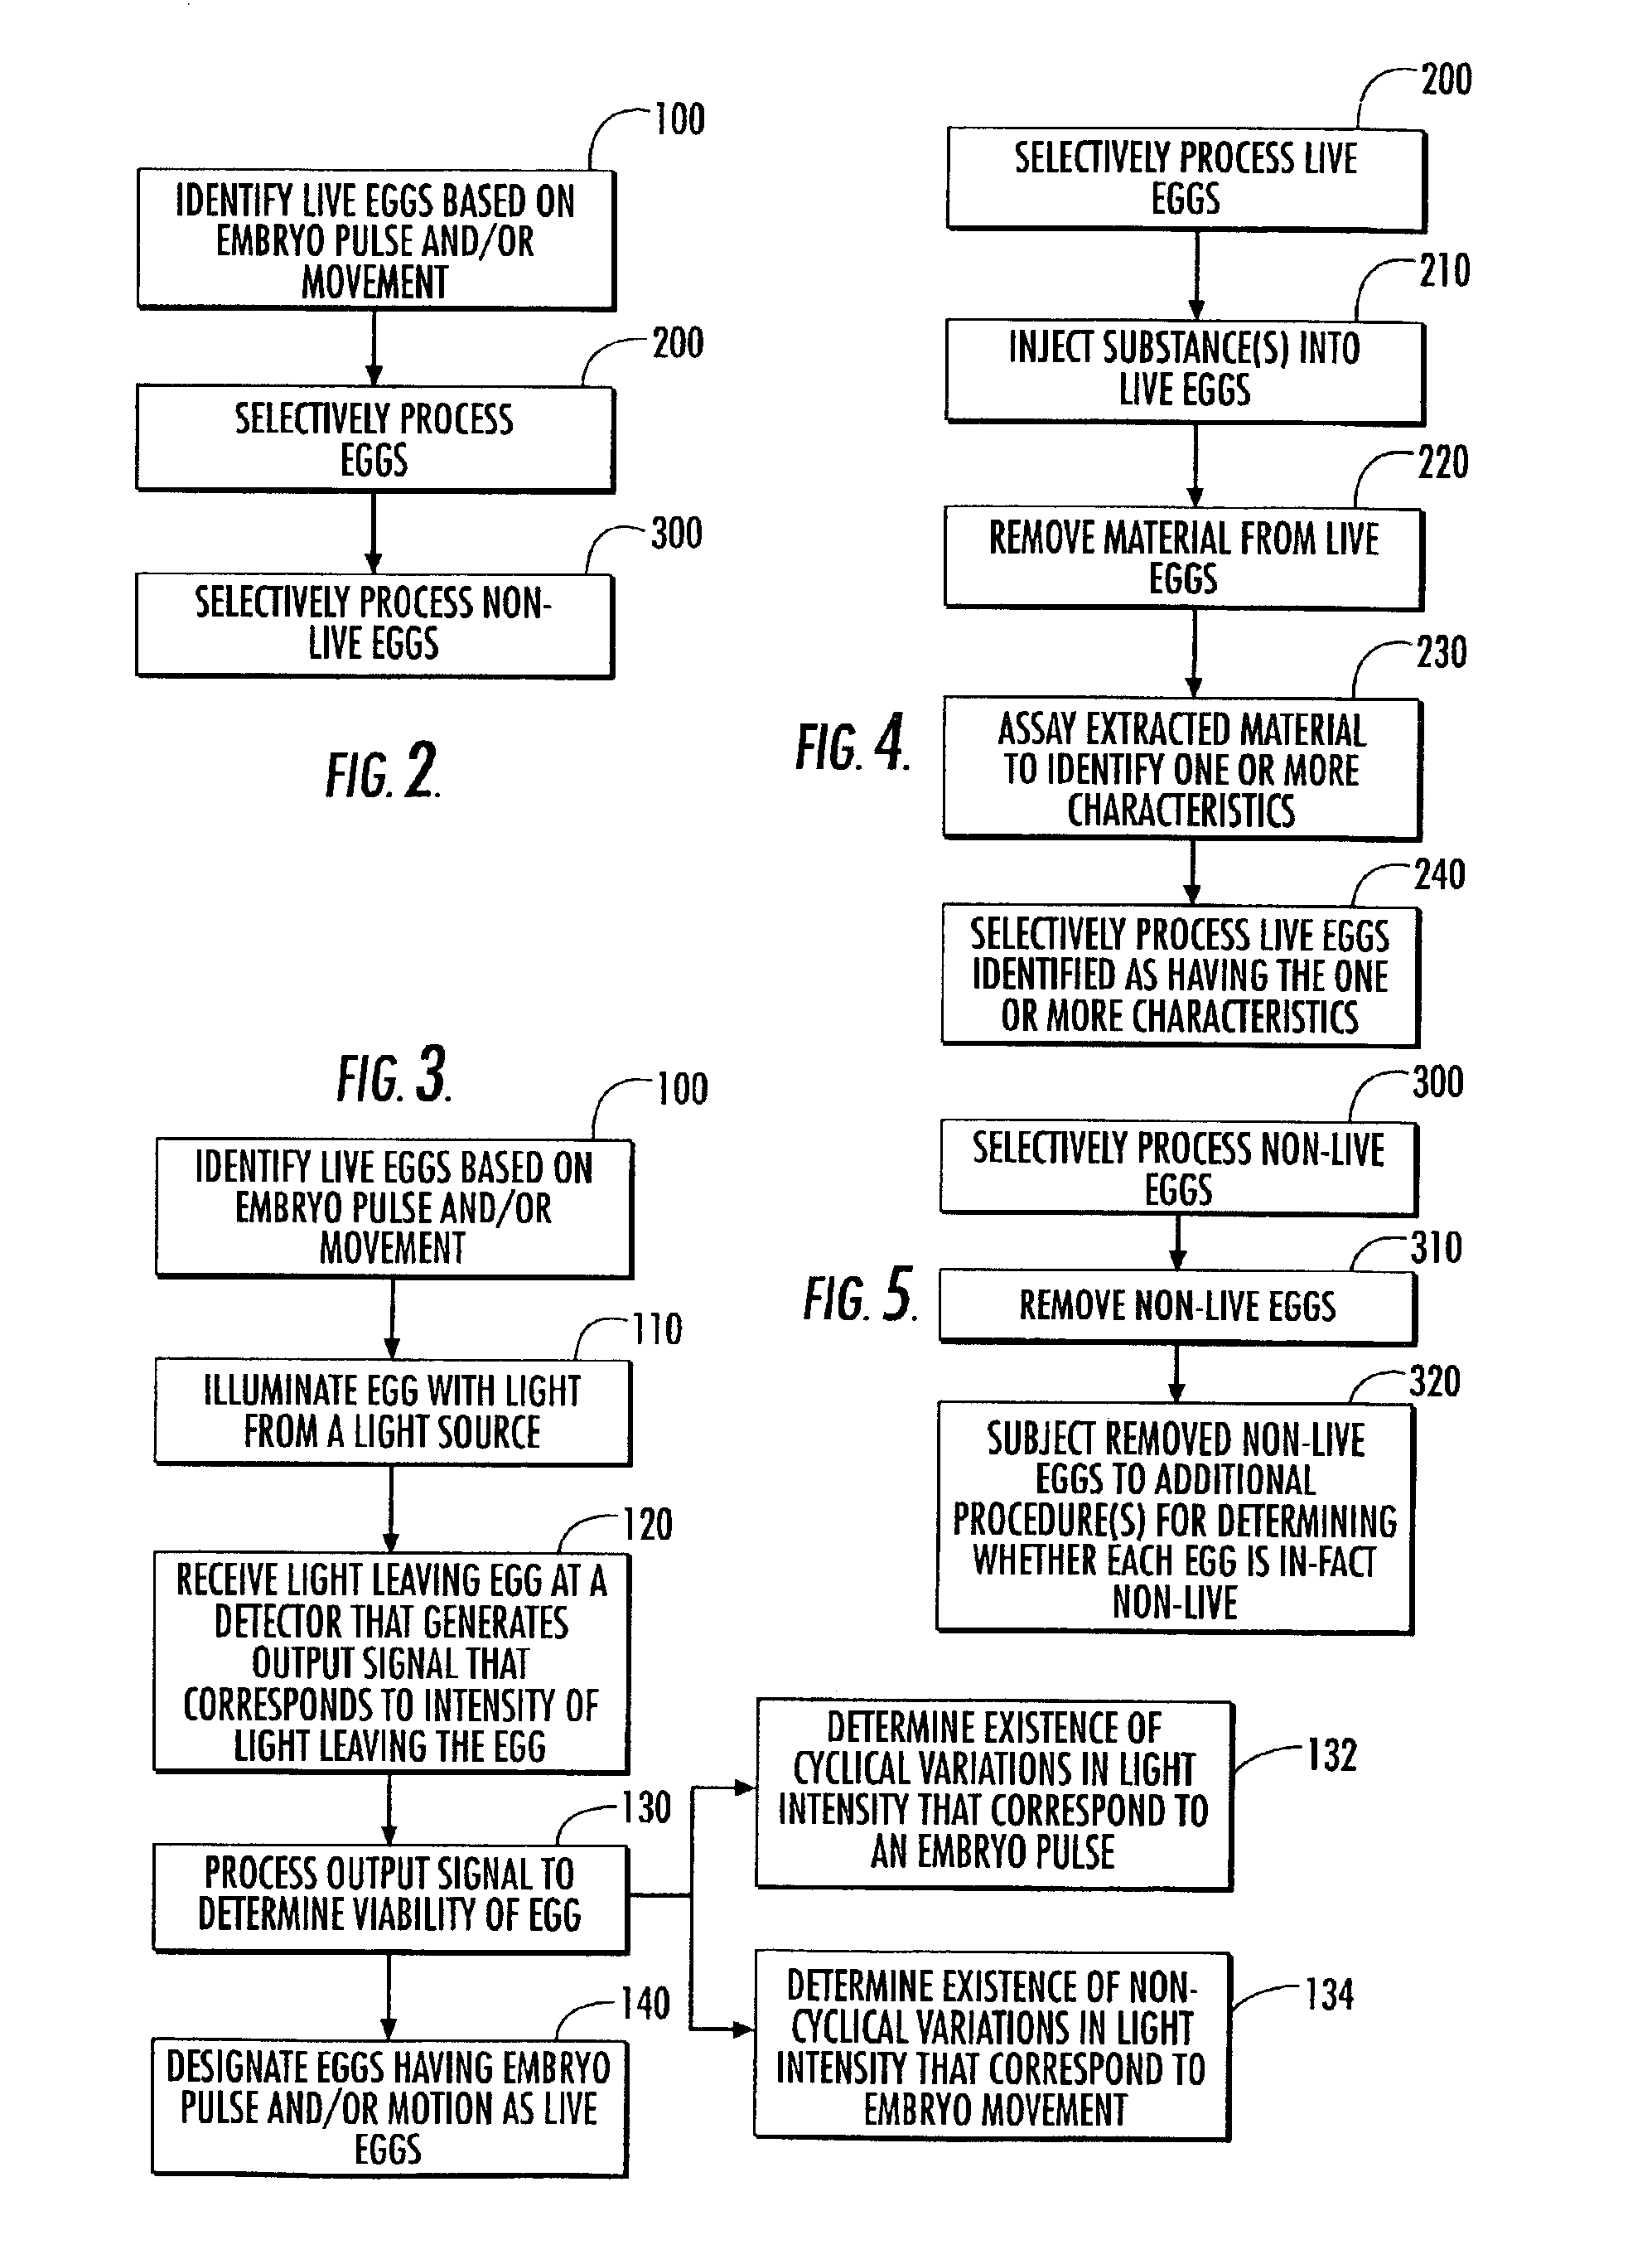 Methods and apparatus for identifying live eggs by detecting embryo heart rate and/or motion